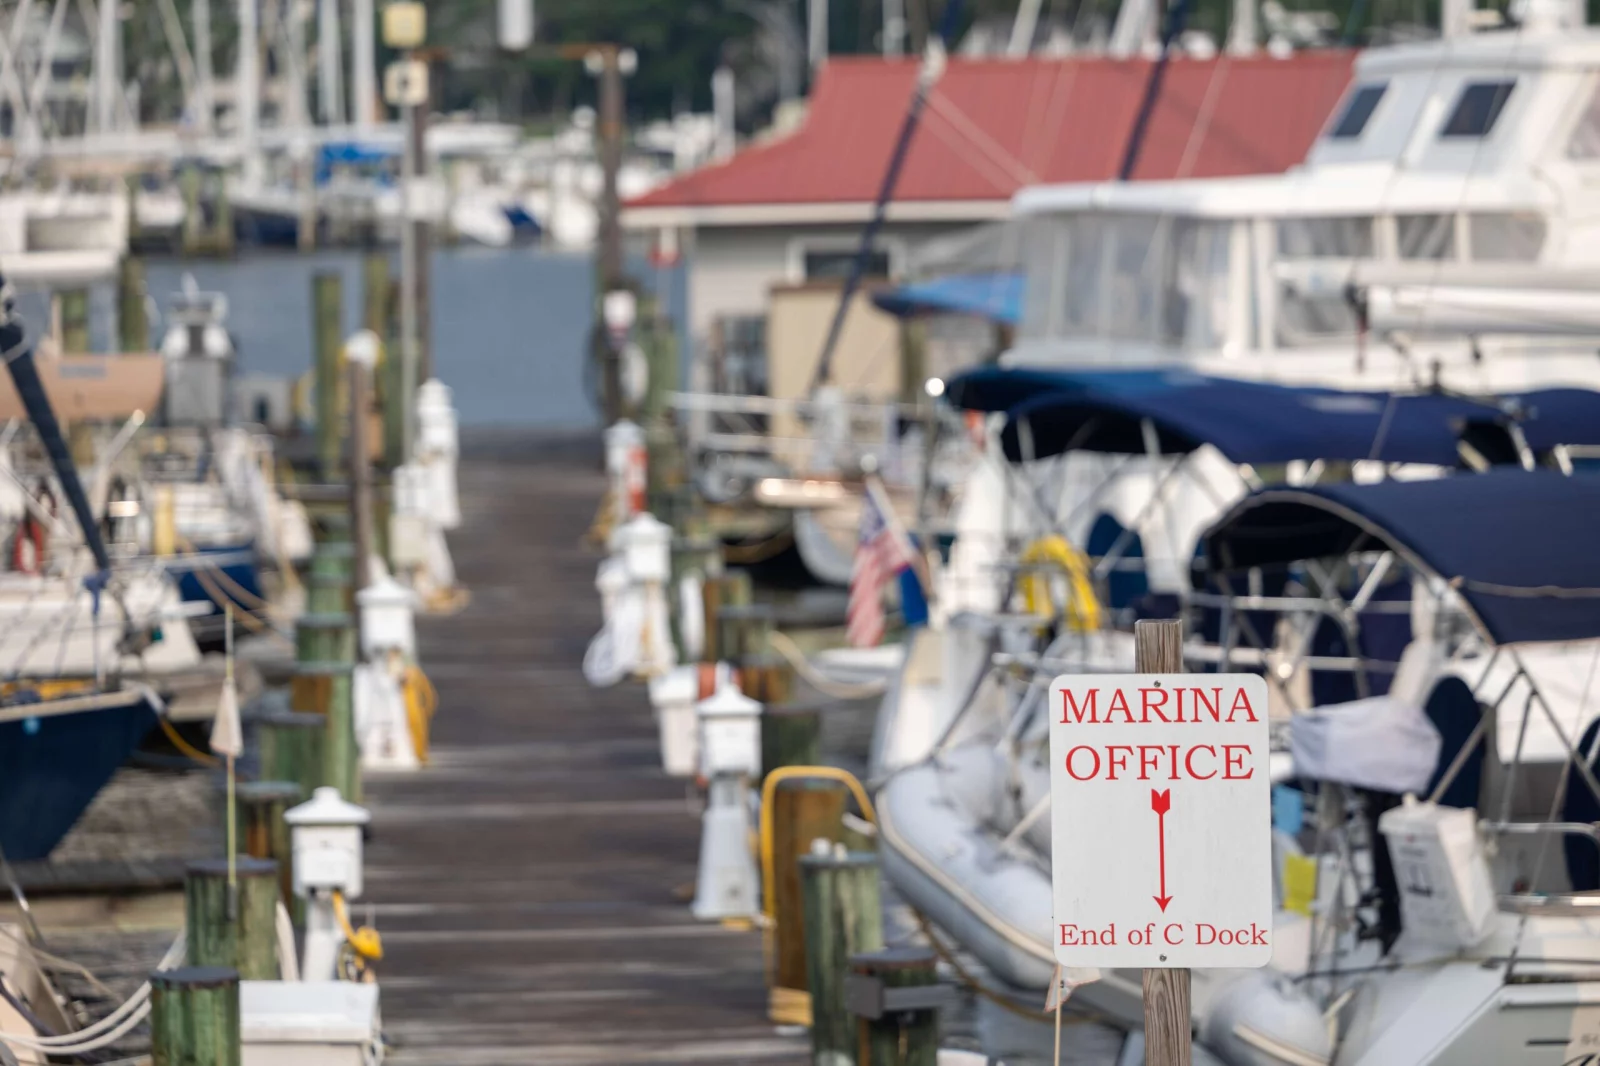 Marina Office Dock Sign with boats in the background